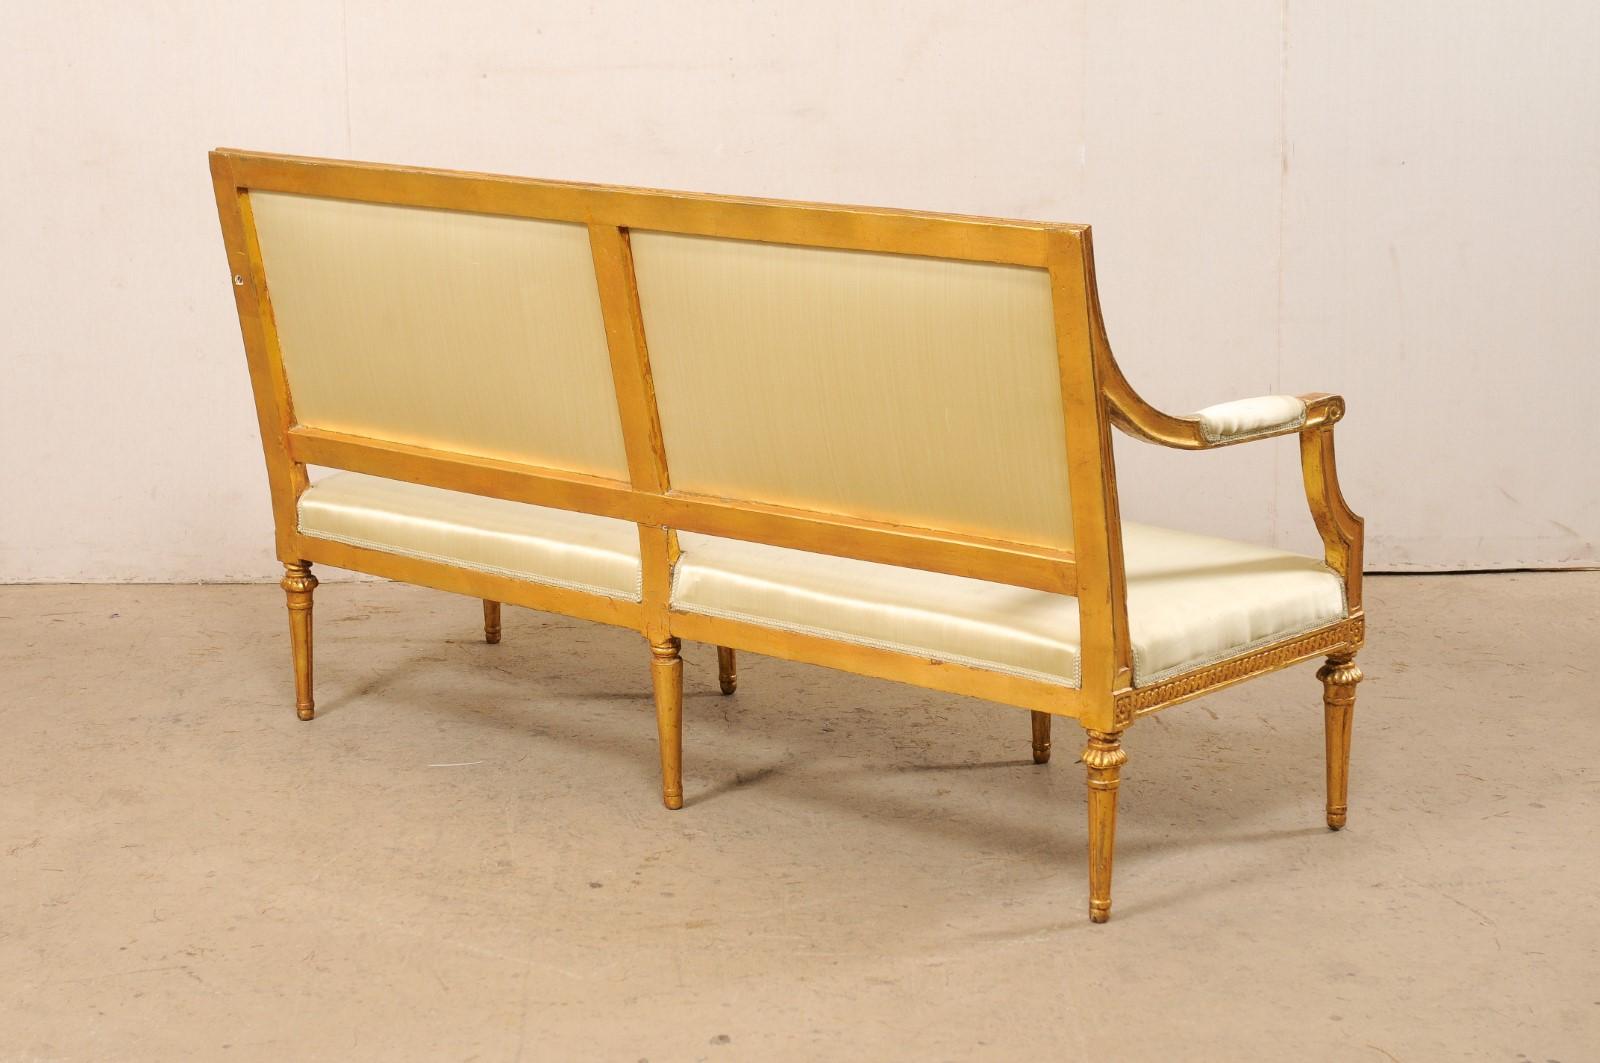 Swedish Neoclassical Style Carved Gilt-Wood & Upholstered Sofa Bench, 19th C. For Sale 1